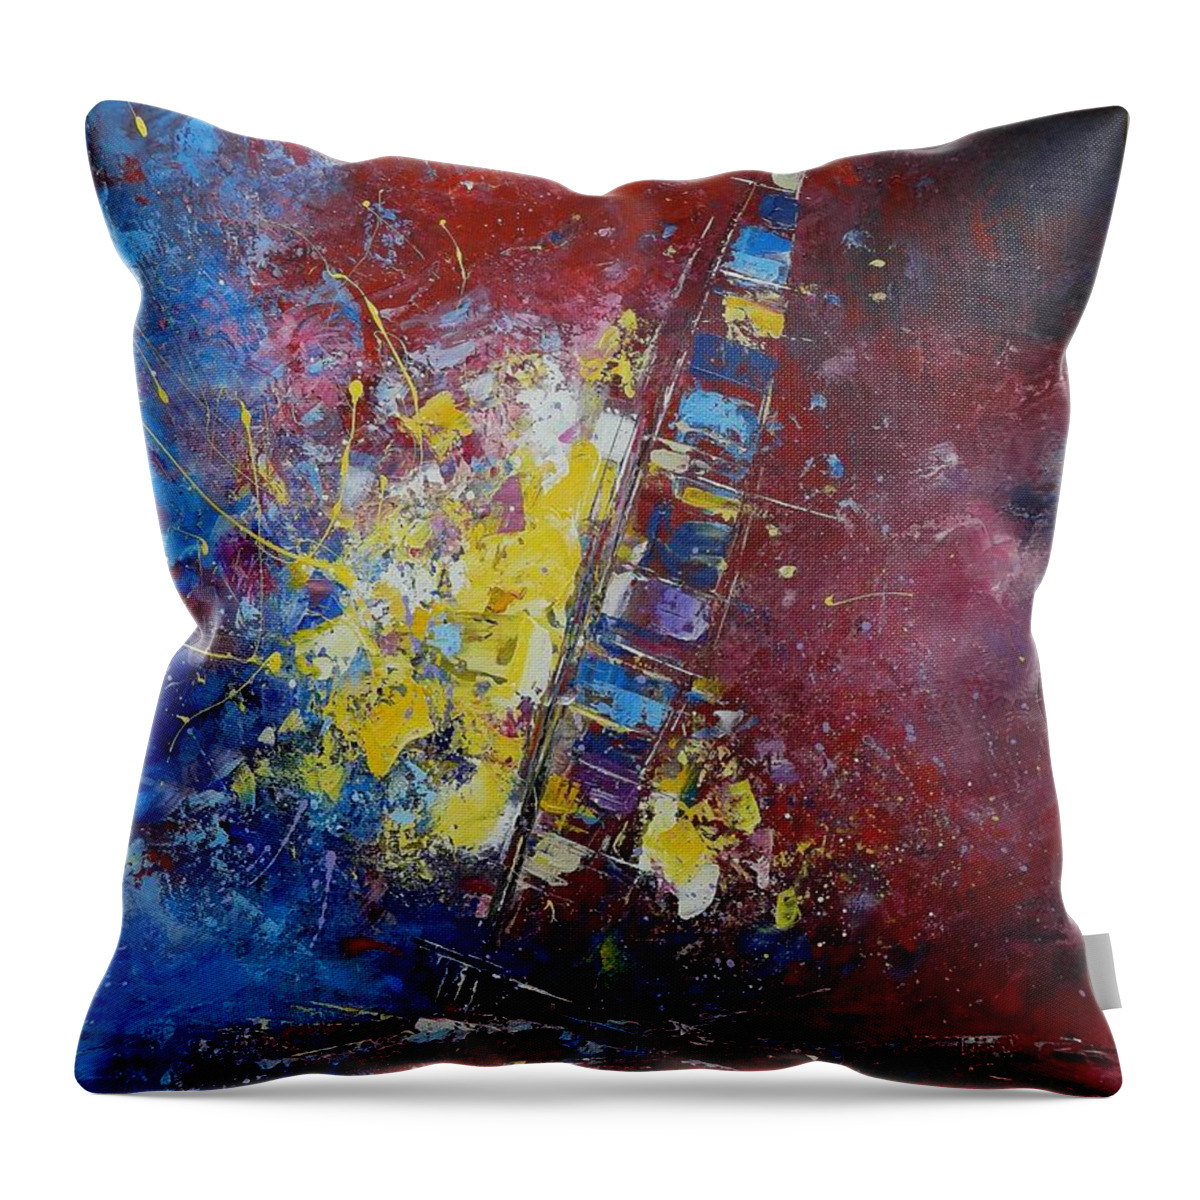 Sailing Throw Pillow featuring the painting Don't let the sun go down on me by Dan Campbell